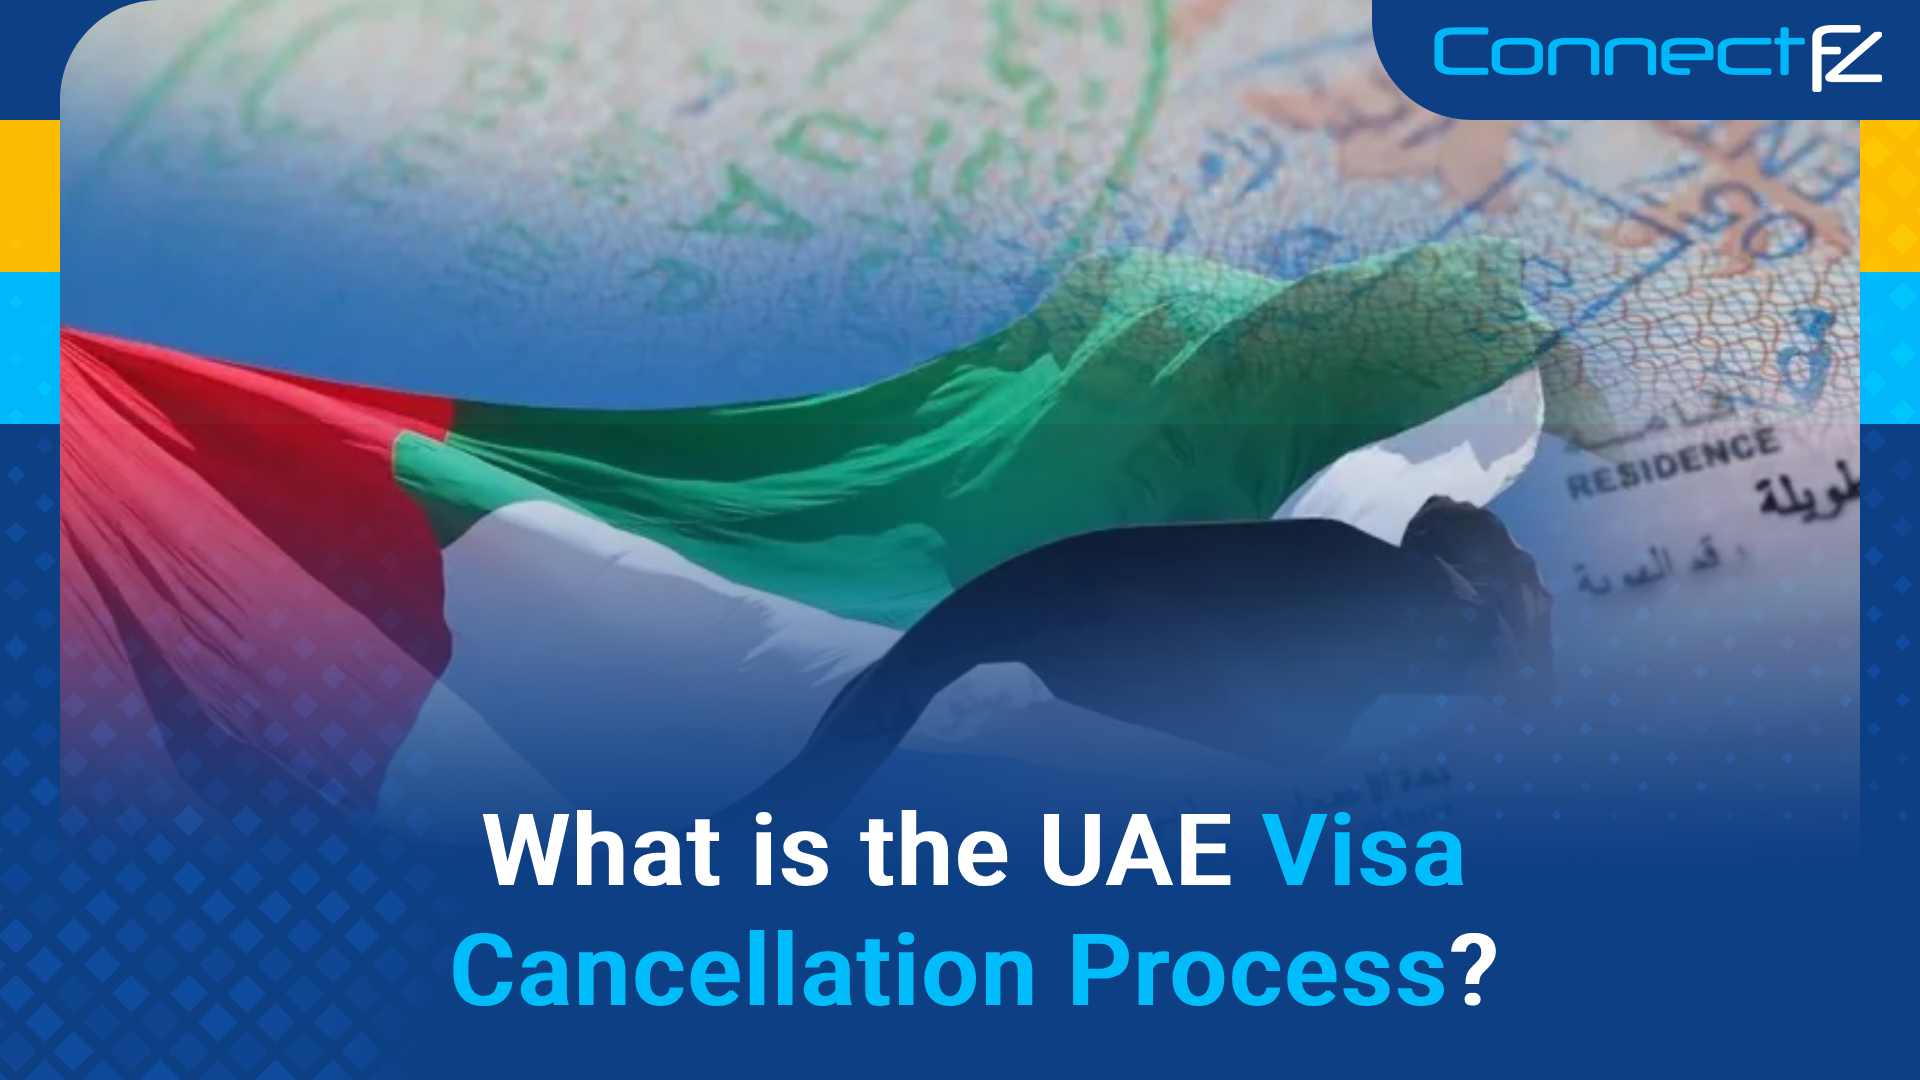 What is the UAE Visa cancellation Process?